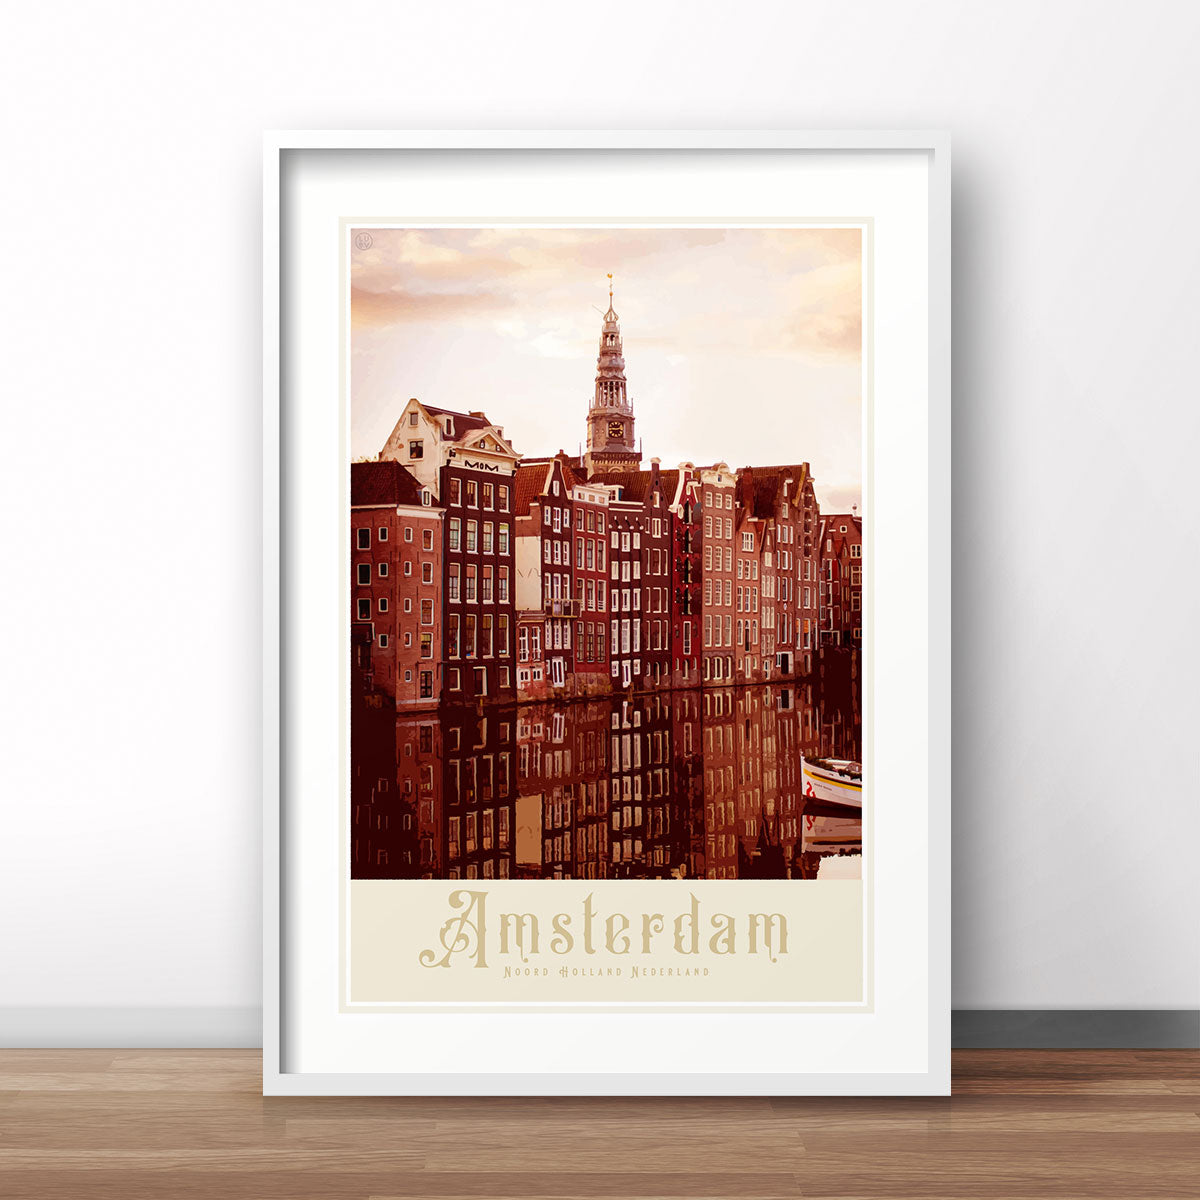 Amsterdam Canal Houses vintage retro poster print from Places We Luv